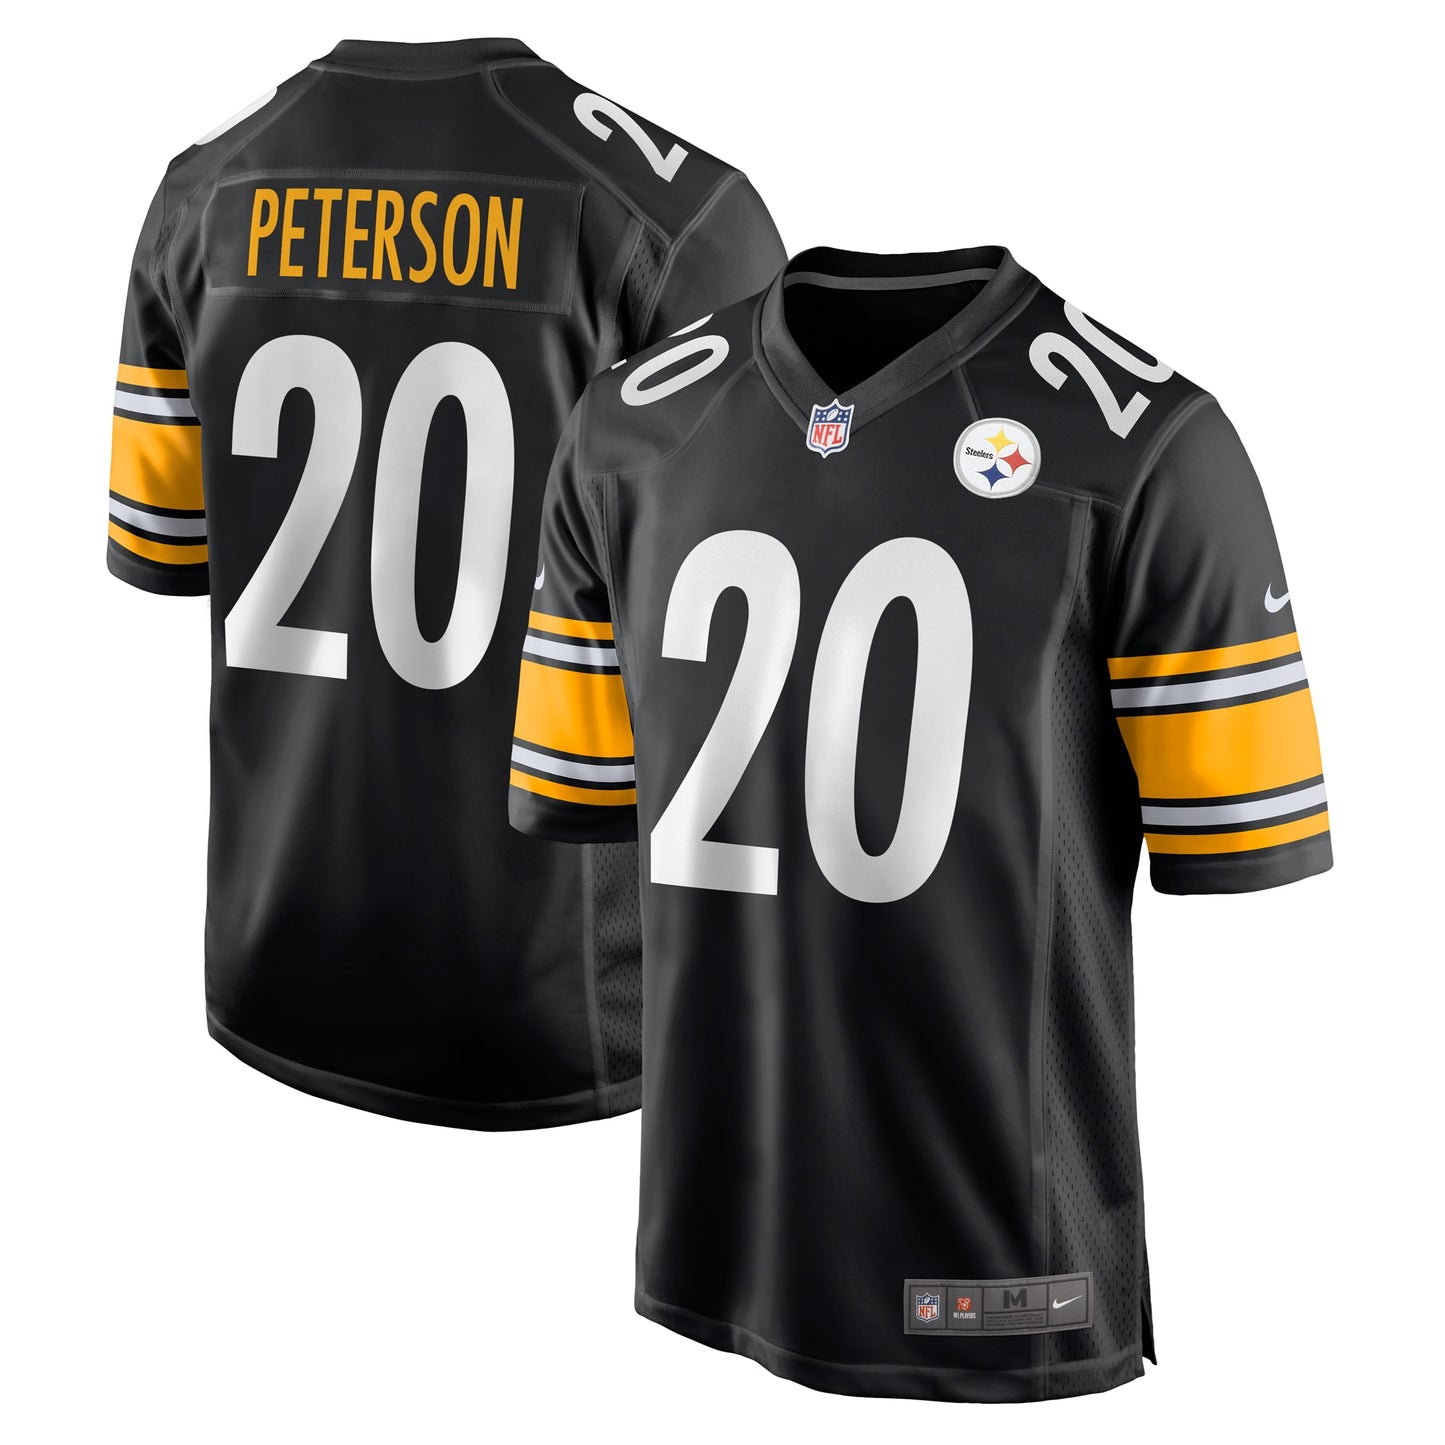 Patrick Peterson Pittsburgh Steelers Nike Game Player Jersey - Black